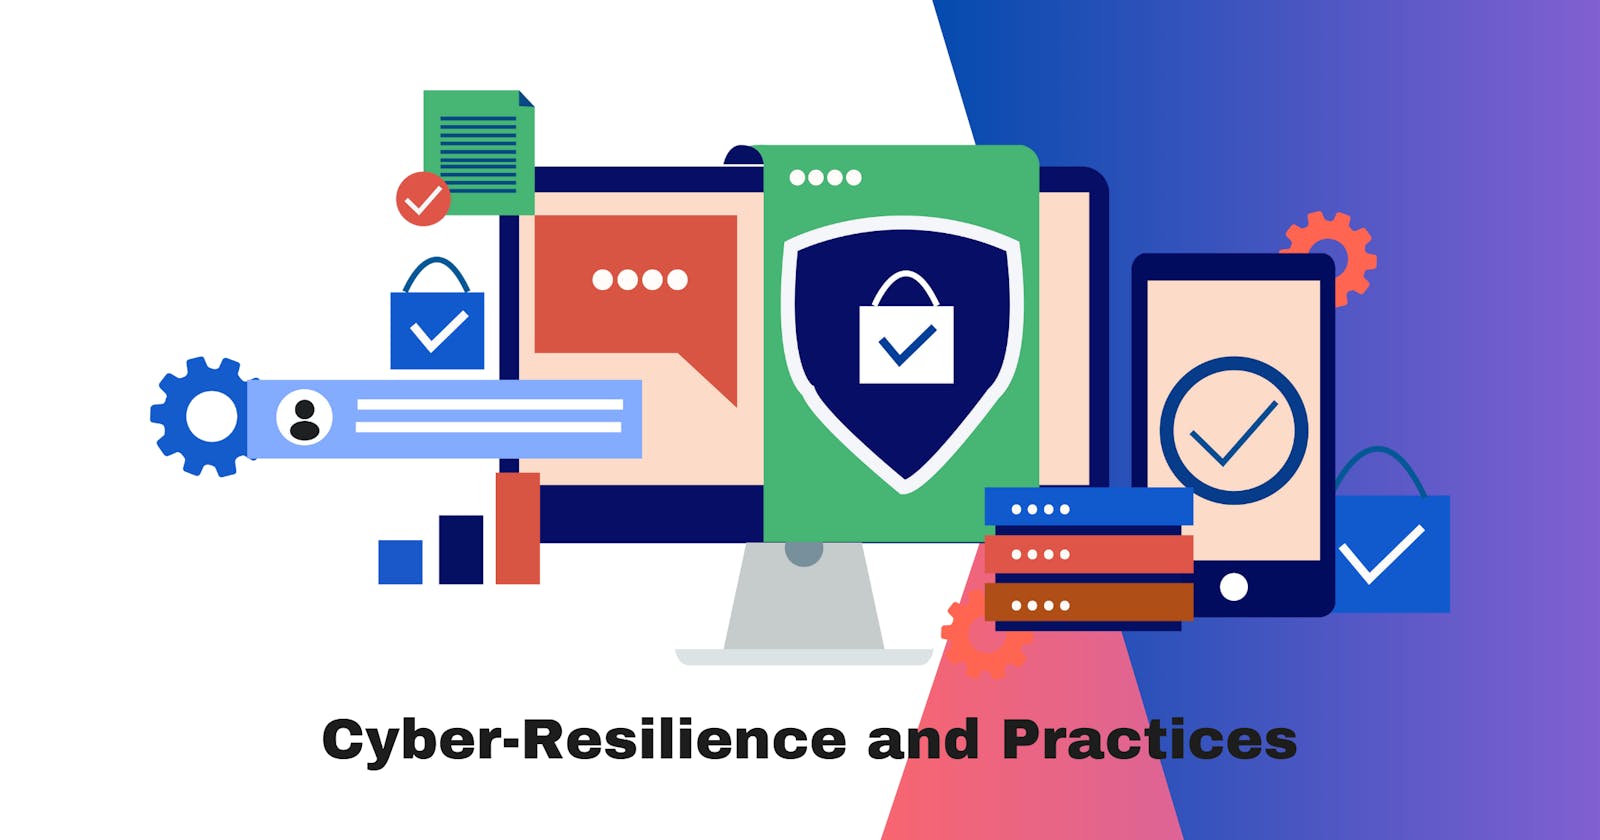 Building Cyber-Resilience: 6 Approaches with NIST CSF